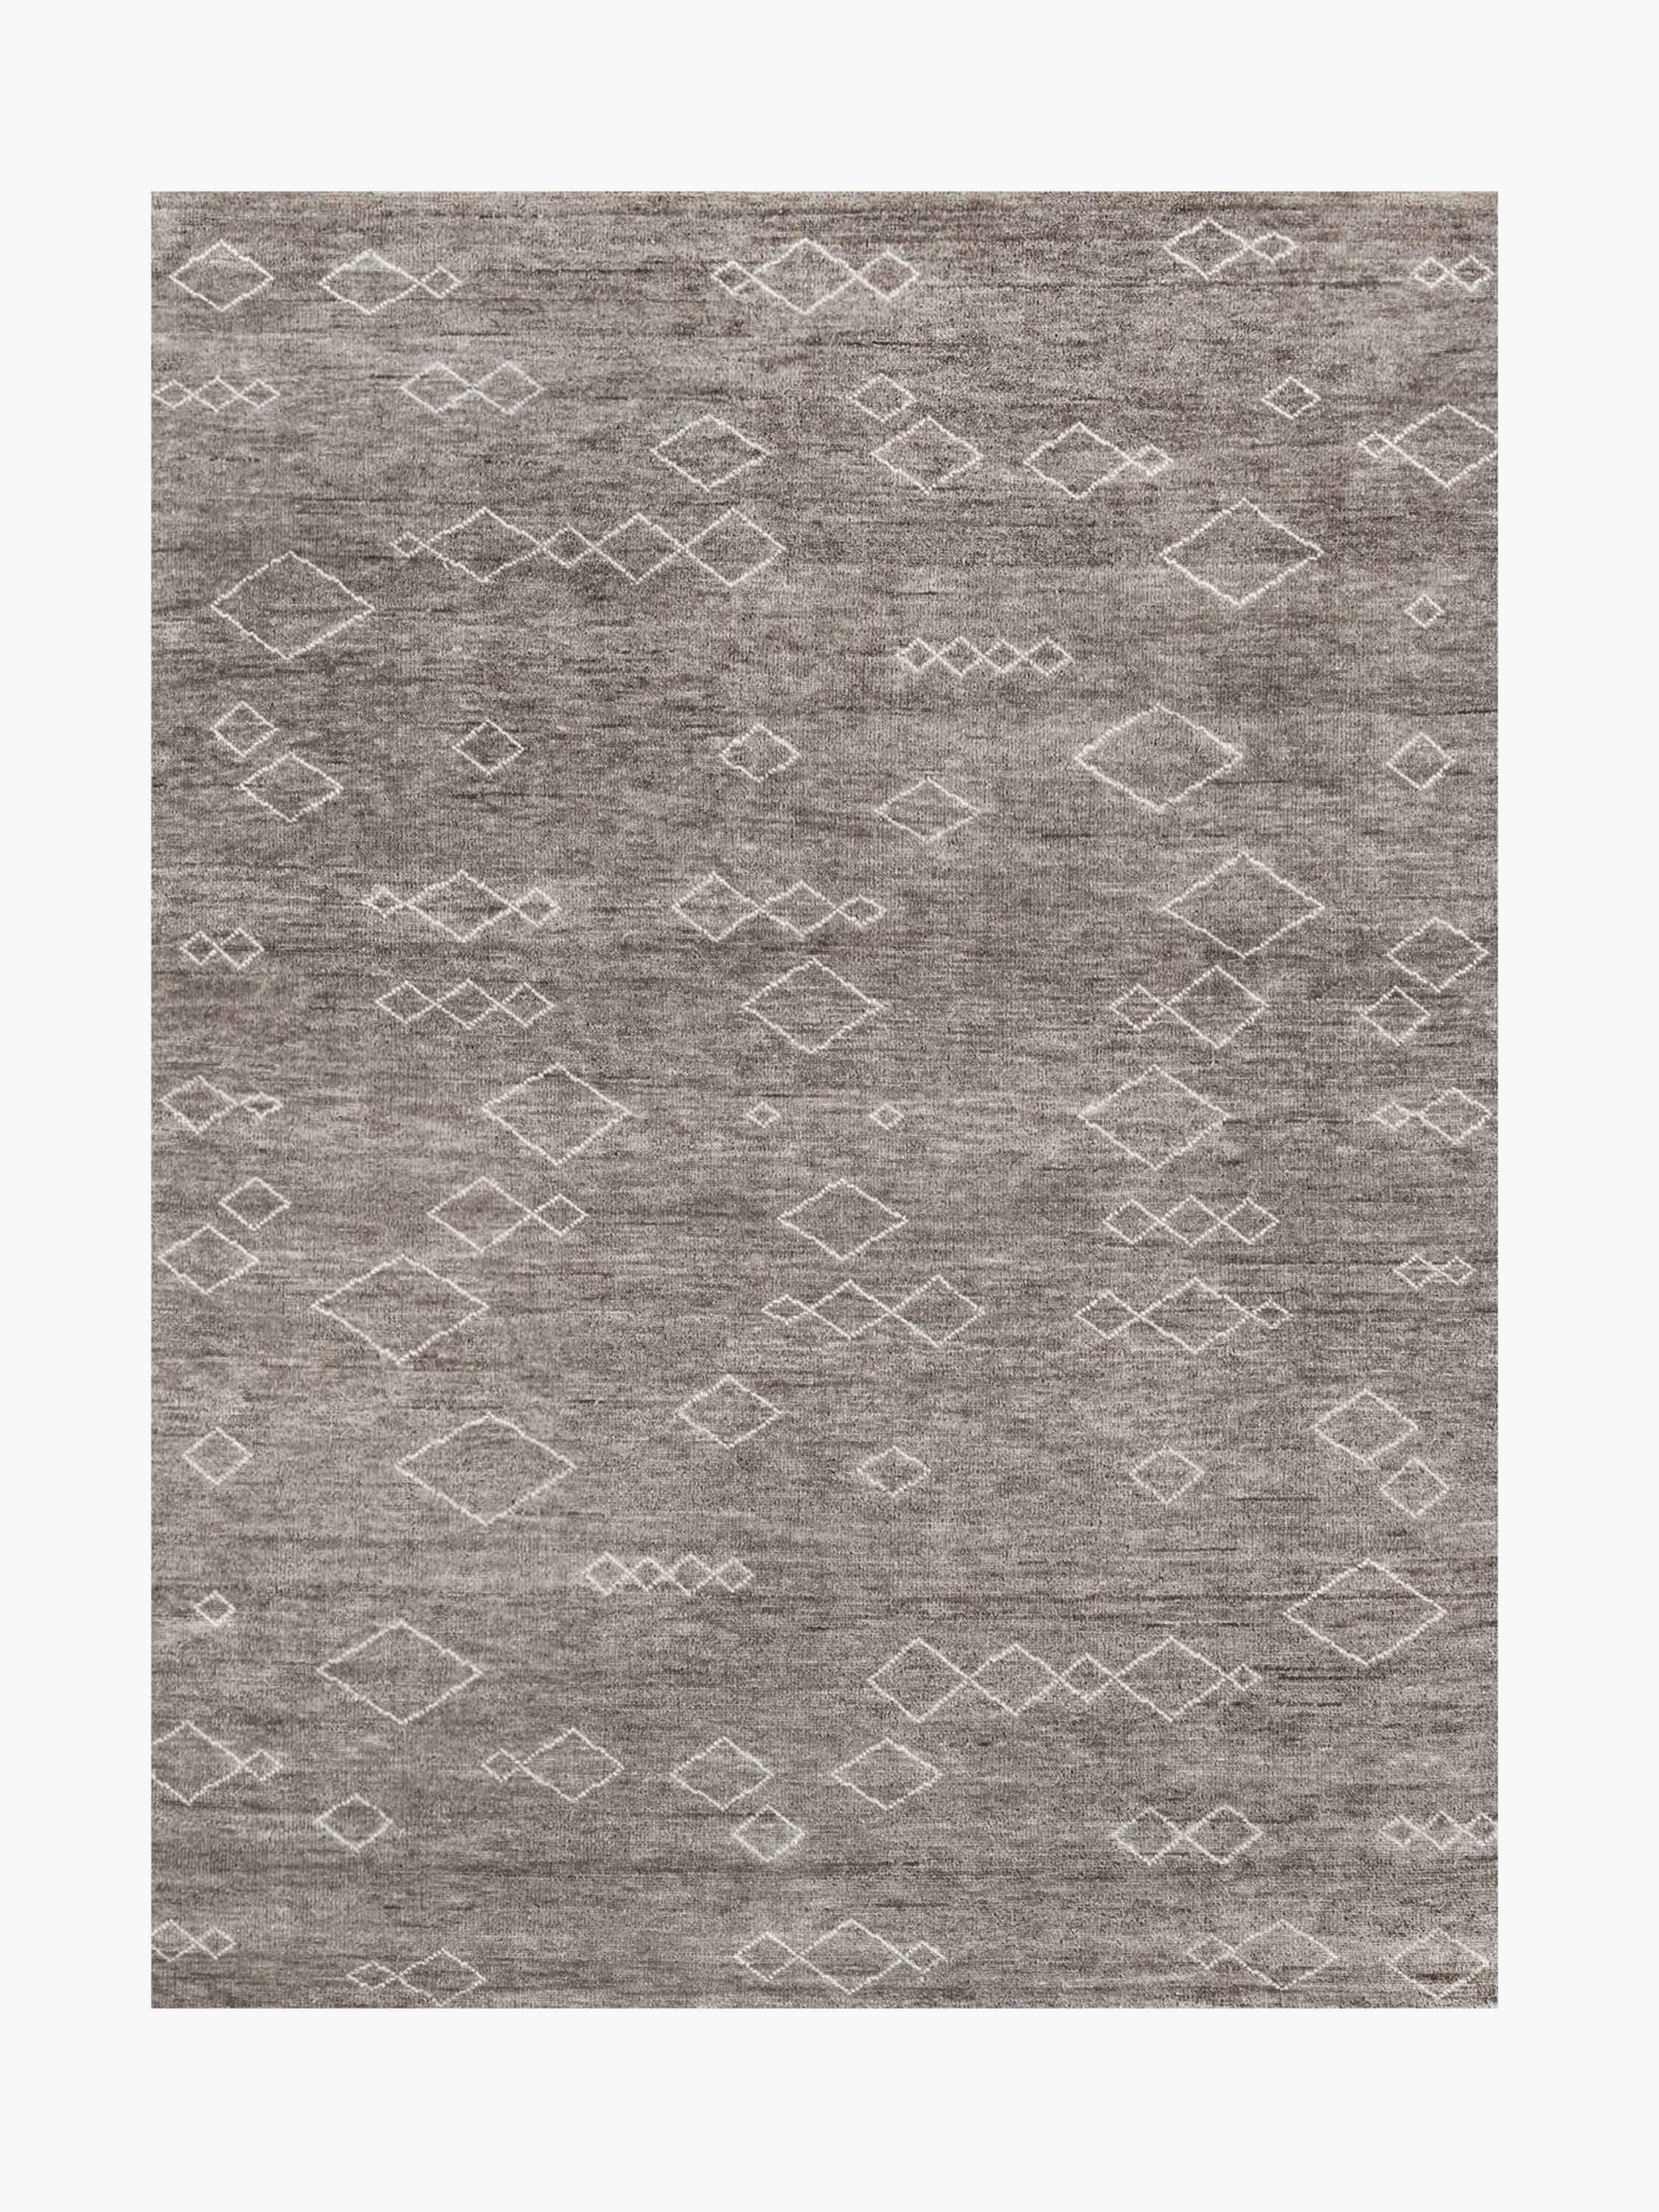 For Sale: Gray (Graphite/Sand) Ben Soleimani Arisa Rug– Moroccan Hand-knotted Plush Wool Carbon/Mist 10'x14'